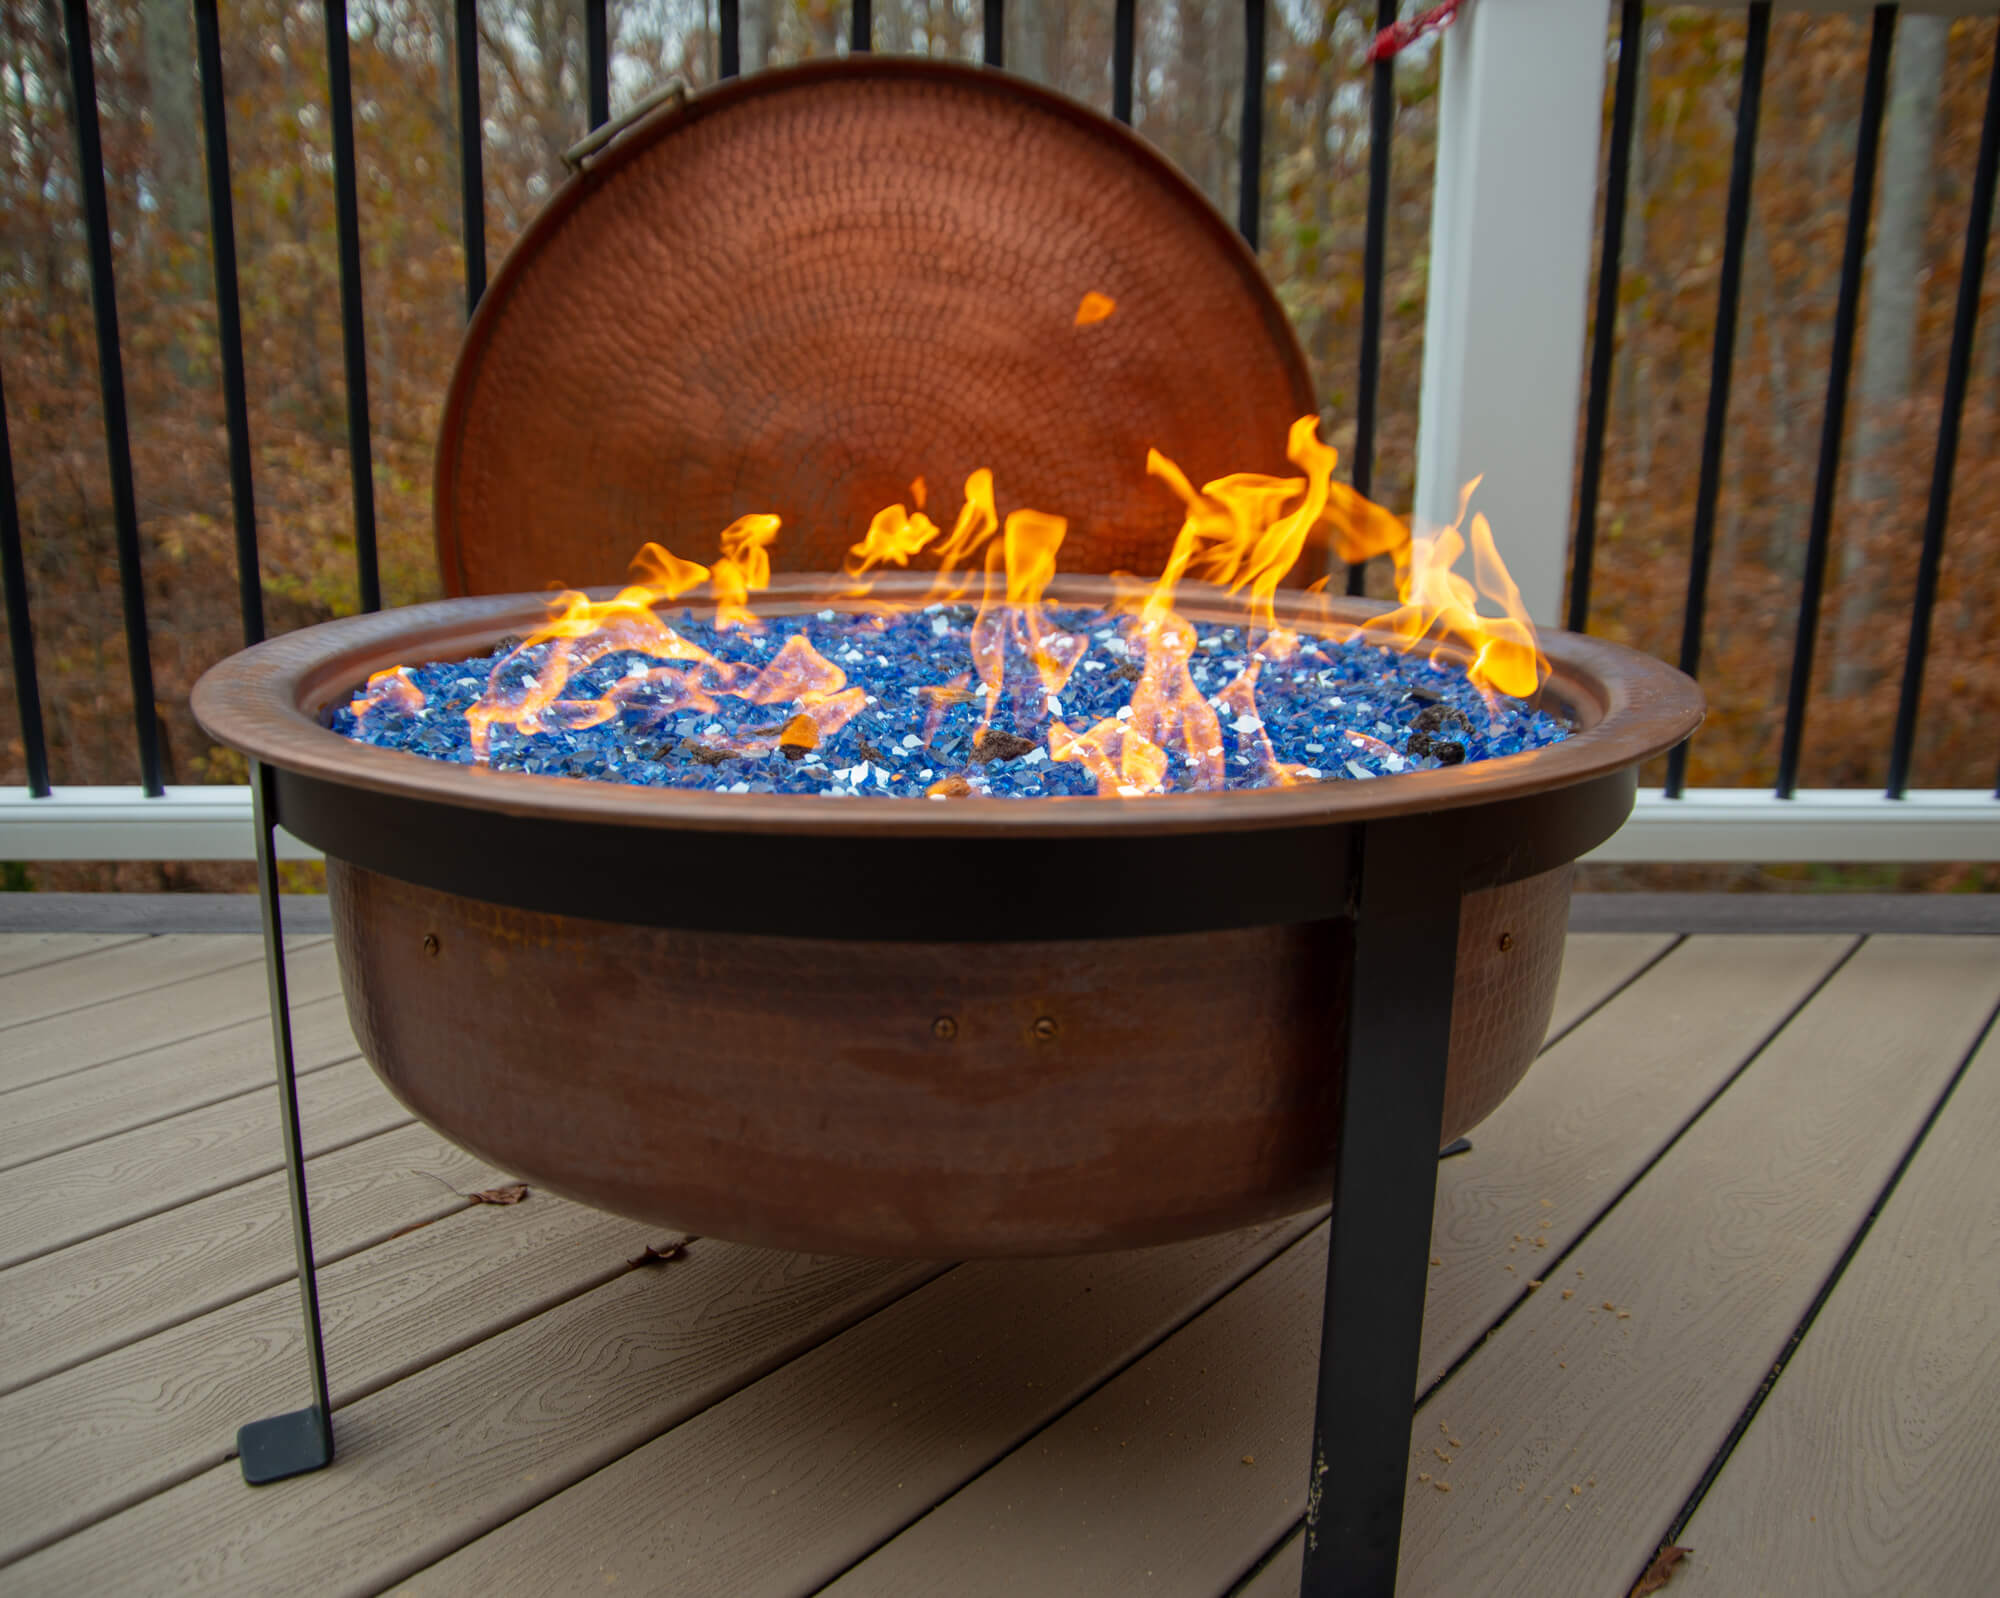 6 Ways To Put A Fire Pit On Wooden Deck, Are Propane Fire Pits Safe On Wooden Decks